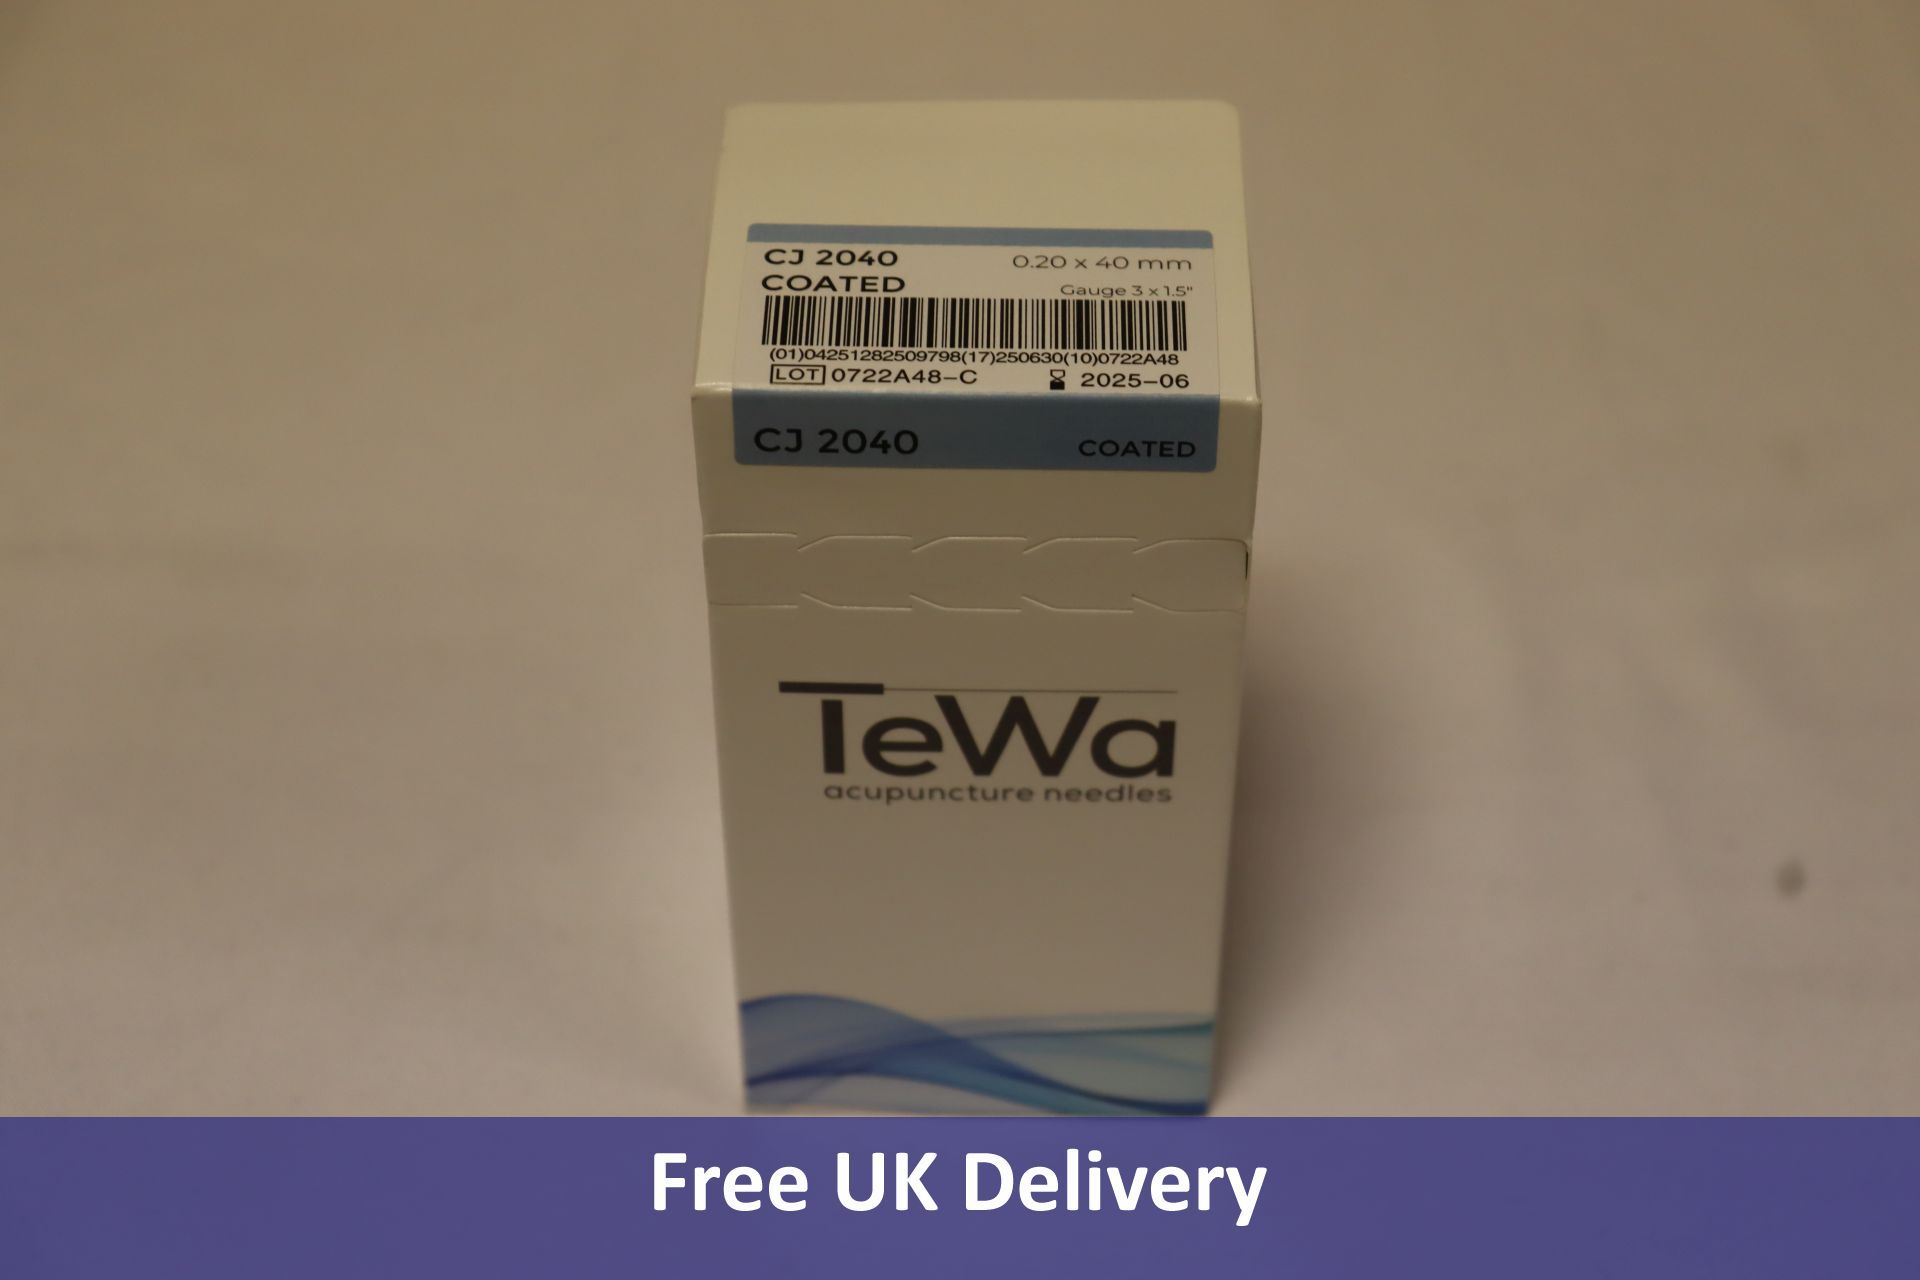 Ten-thousand Tewa Acupuncture Needles, 0.20 x 40mm, in 100 packs of 100 - Image 4 of 10